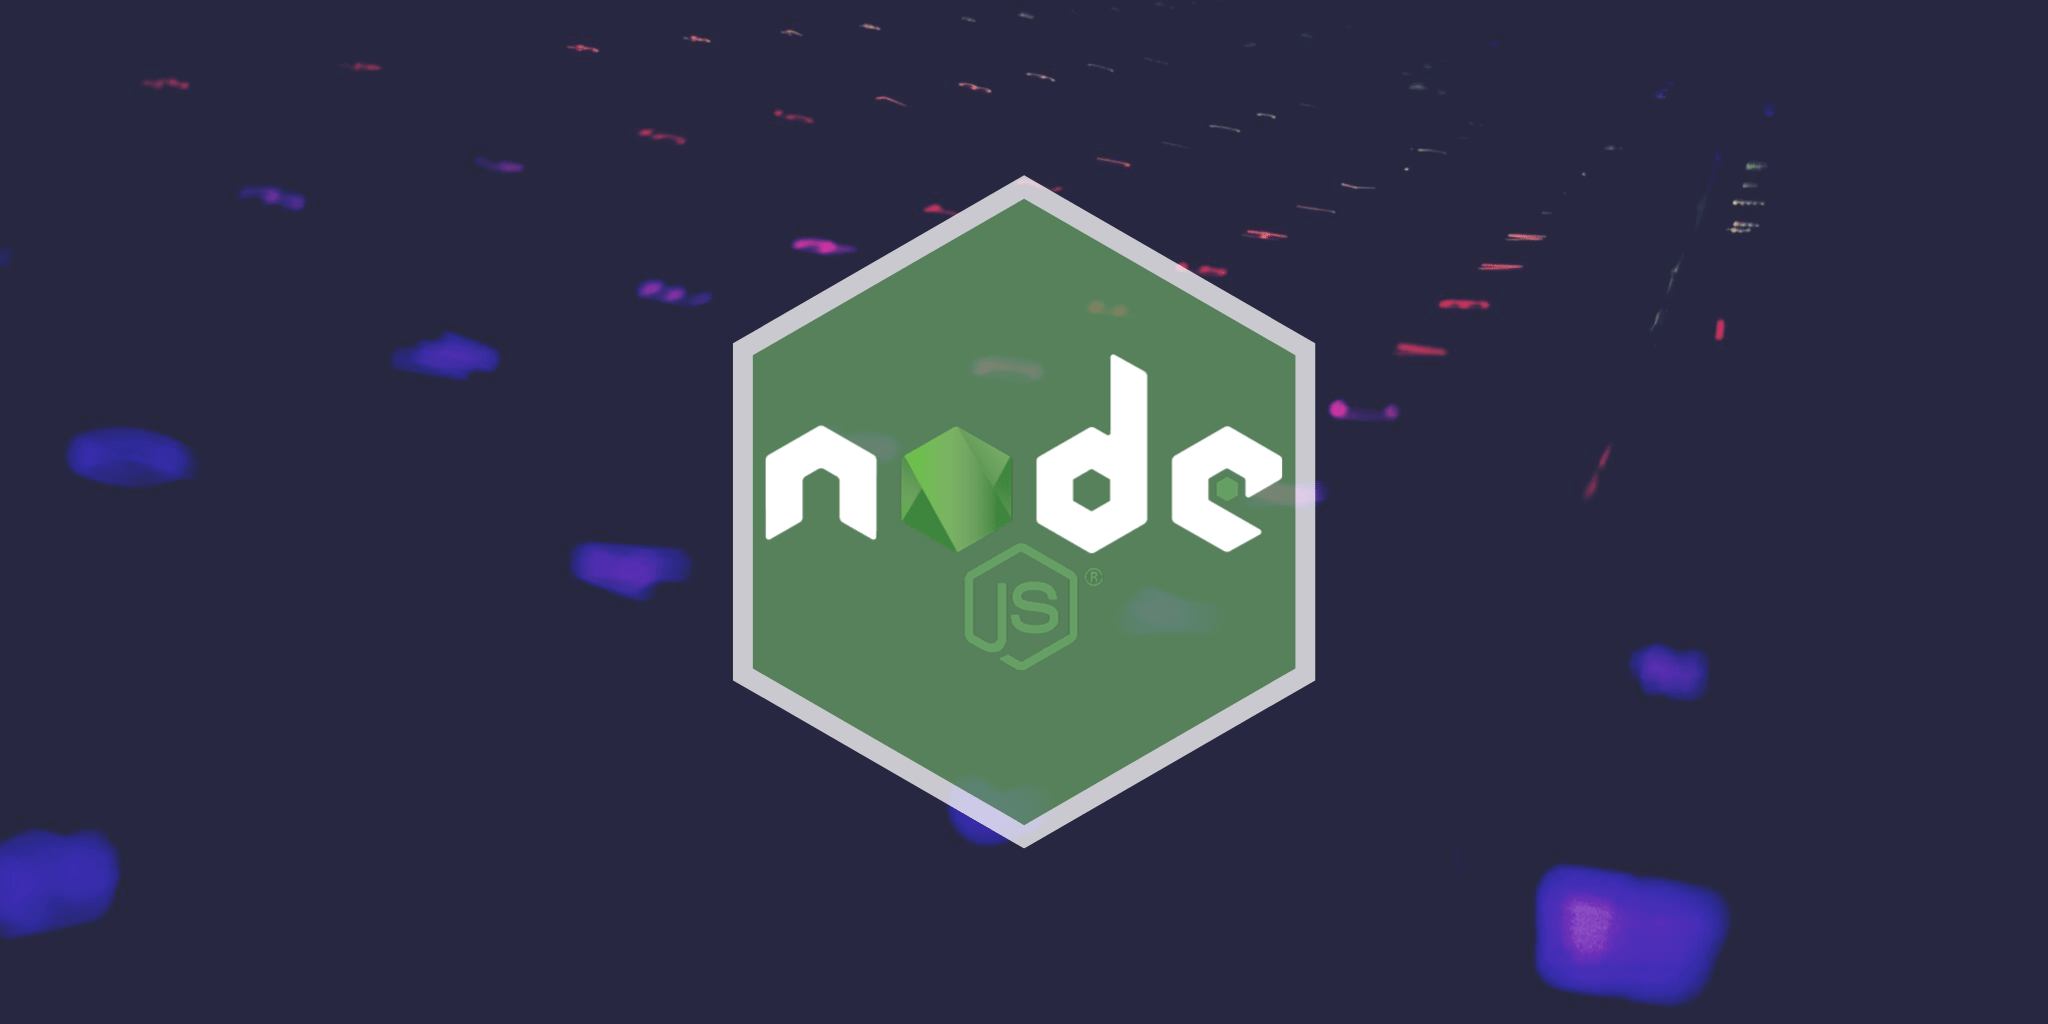 Node.js is a great runtime environment - and here's why you should use it